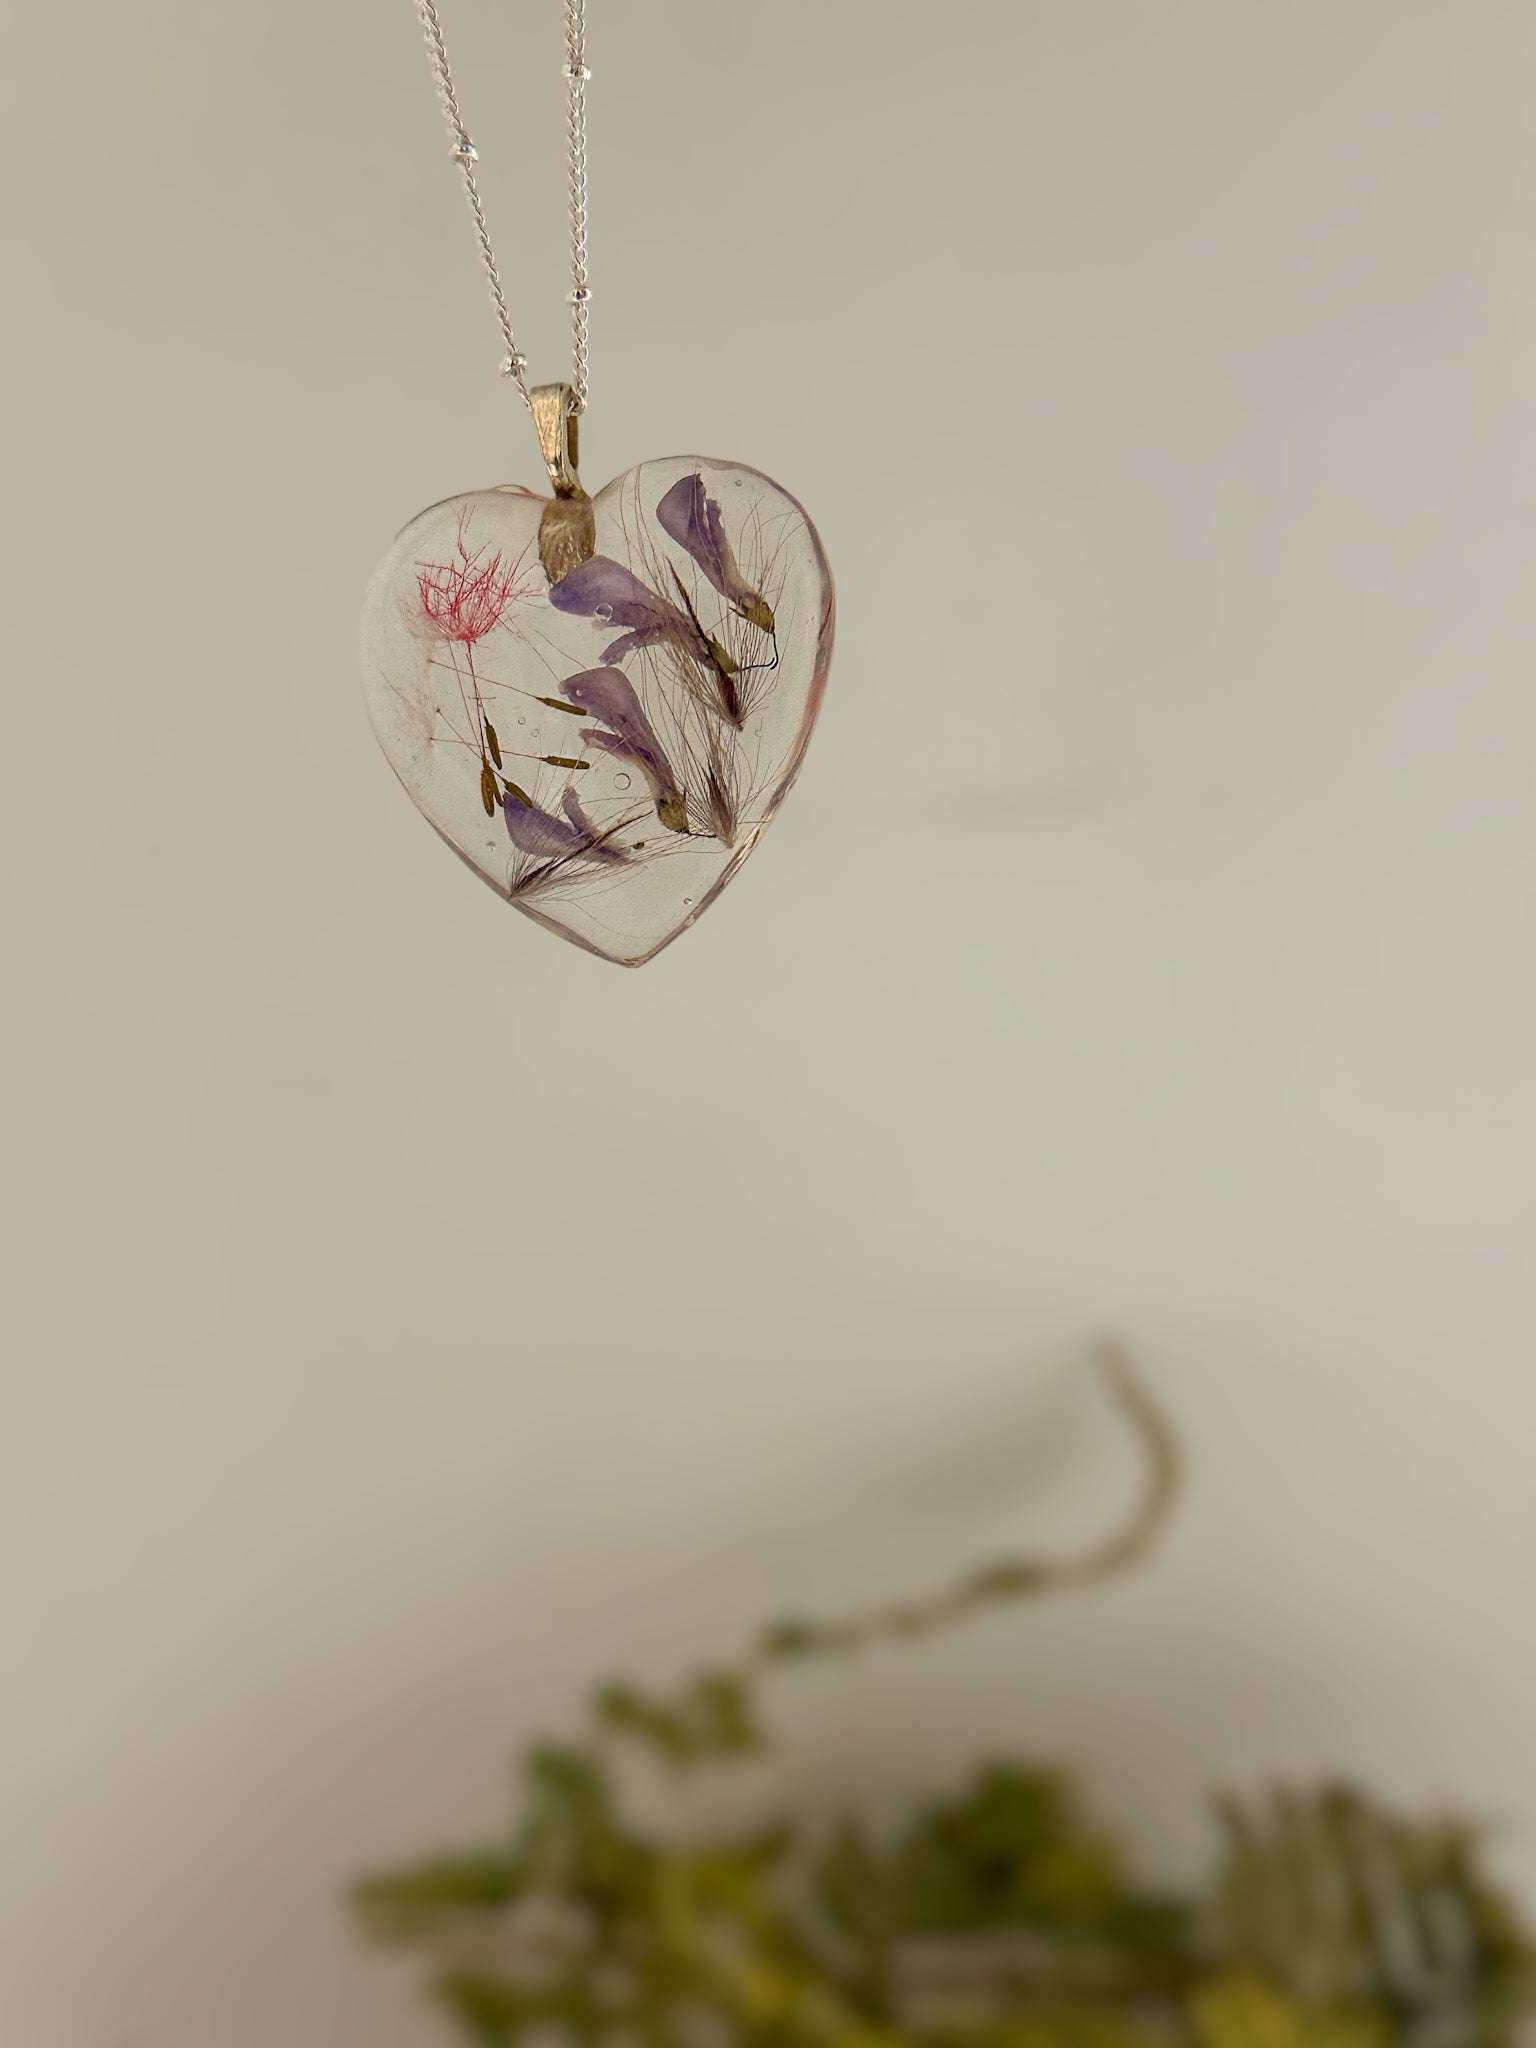 Whimsical Three Wishes Heart Pendant - Handmade with Resin & Flowers